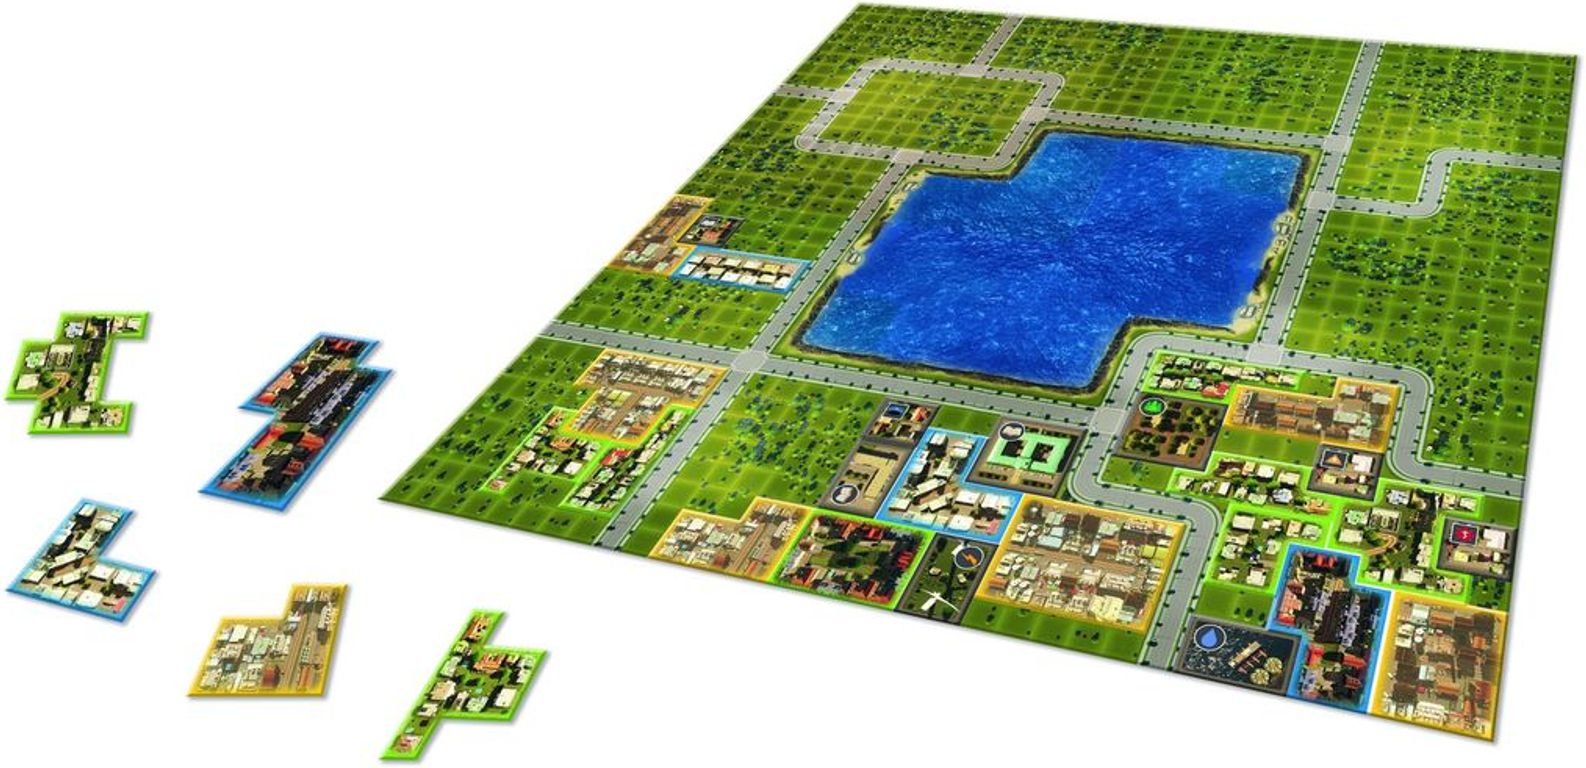 Cities: Skylines - The Board Game tiles